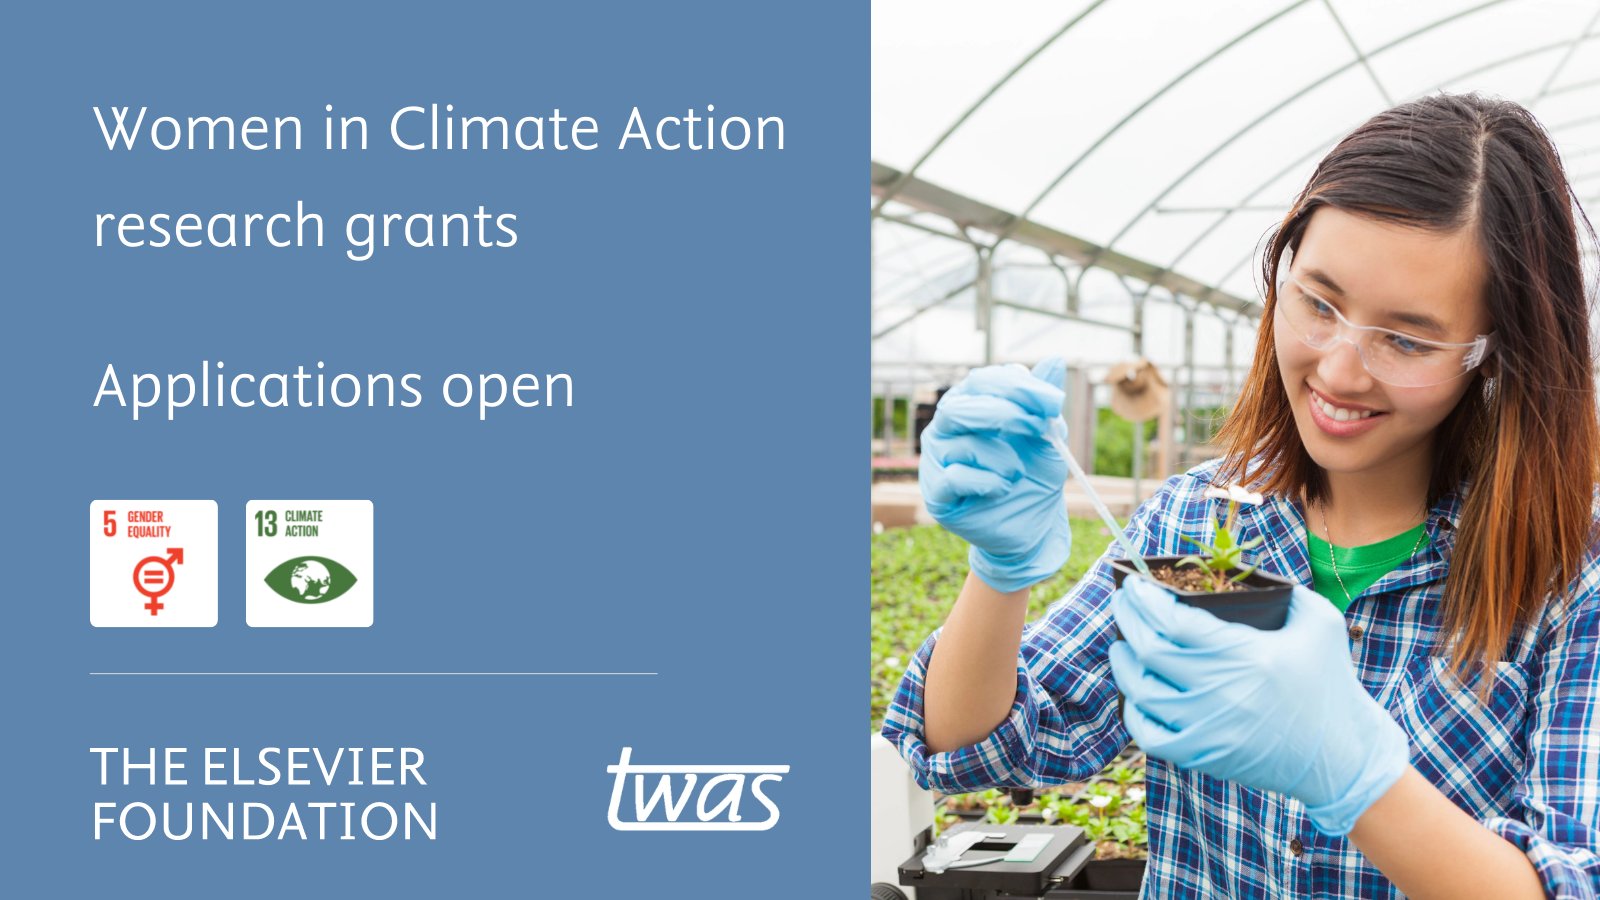 TWAS-Elsevier Foundation Project Grants for Gender Equity and Climate Action 2022 (up to $25,000)